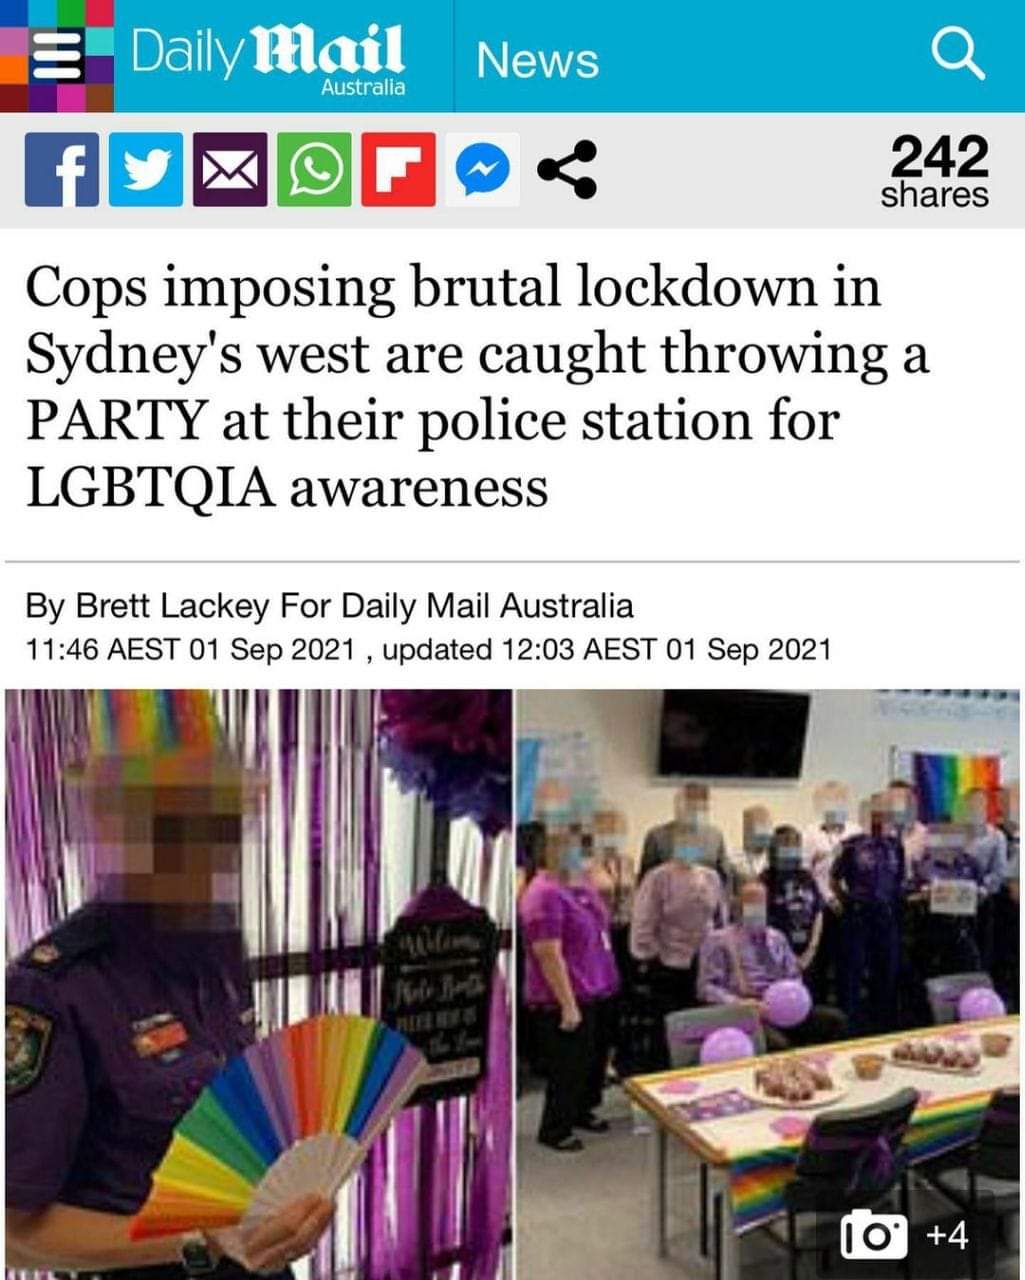 sydneycopsgaypartyimageonly.jfif